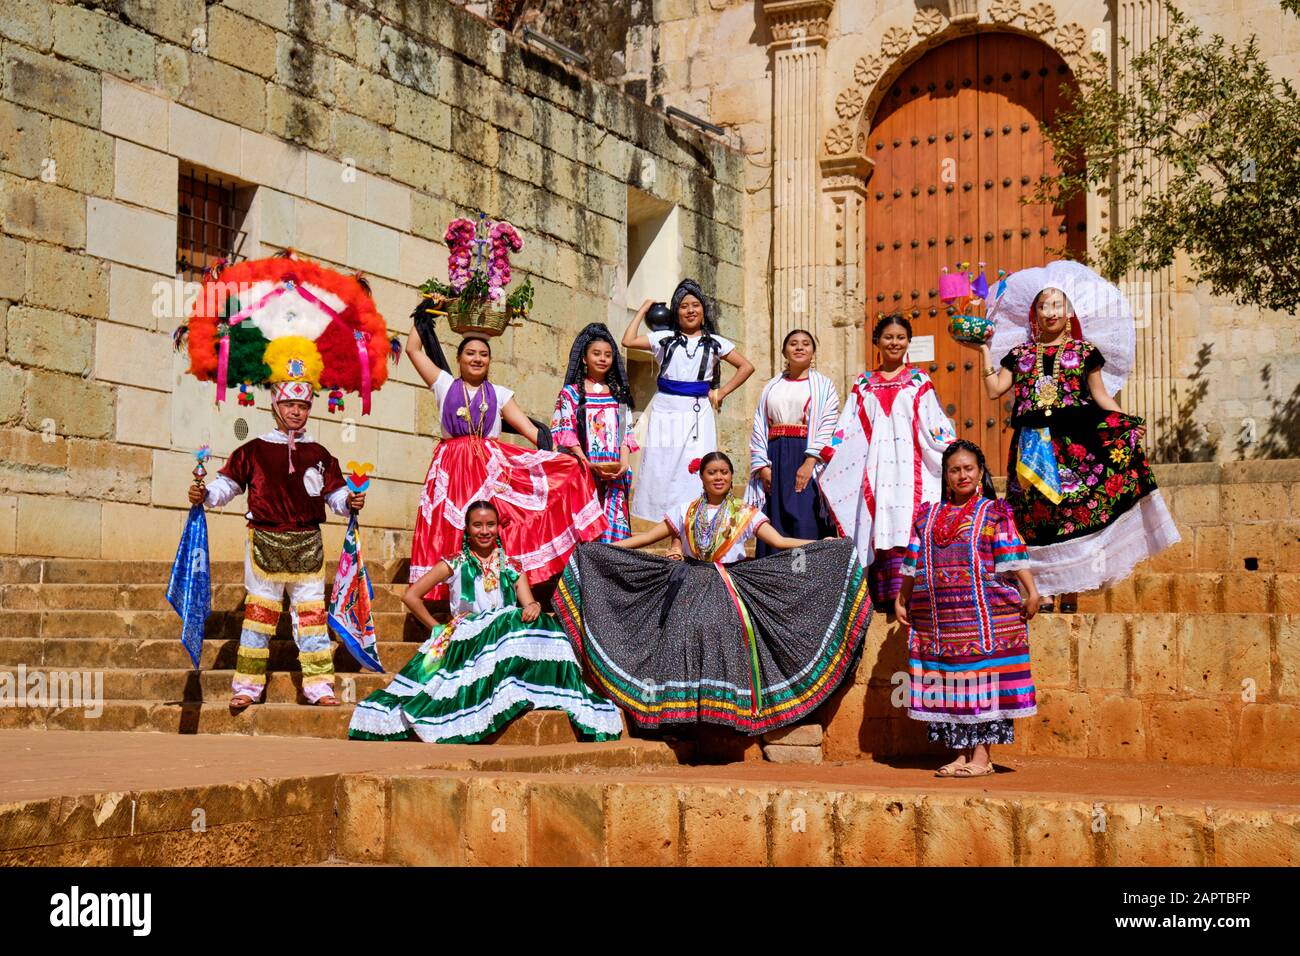 Group of people in traditional Mexican clothing posing in midday sun at door of large church Stock Photo